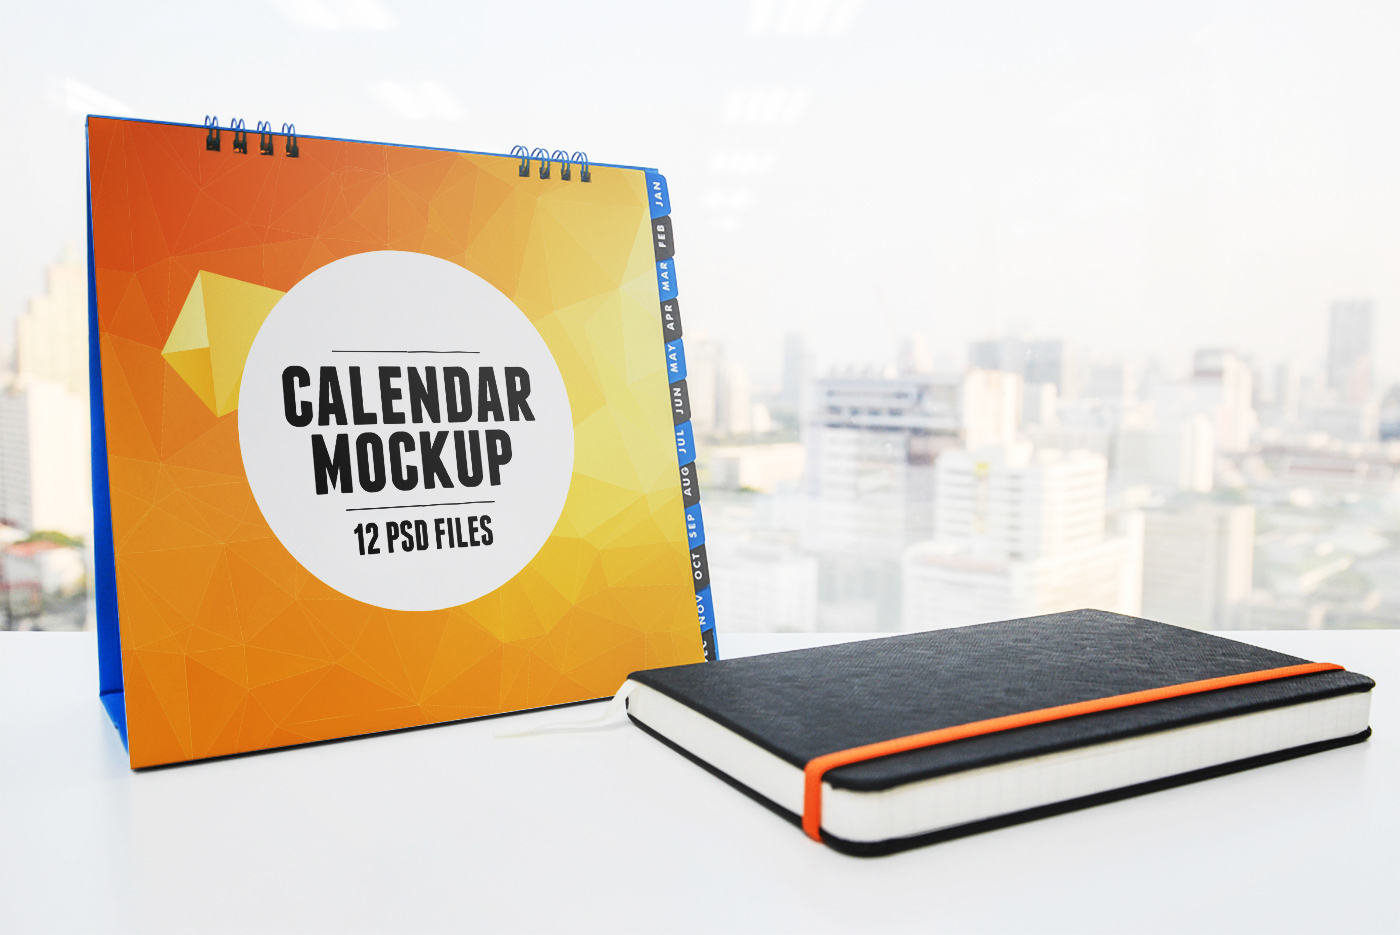 CALENDAR DATE DAY DESIGN DESK CALENDAR EVENT MOCK-UP MOCKUP MONTH NEW YEAR OFFICE PAGE PAPER PRINT SHADOWS TABLE CALENDAR TEMPLATE STATIONERY business calendar year